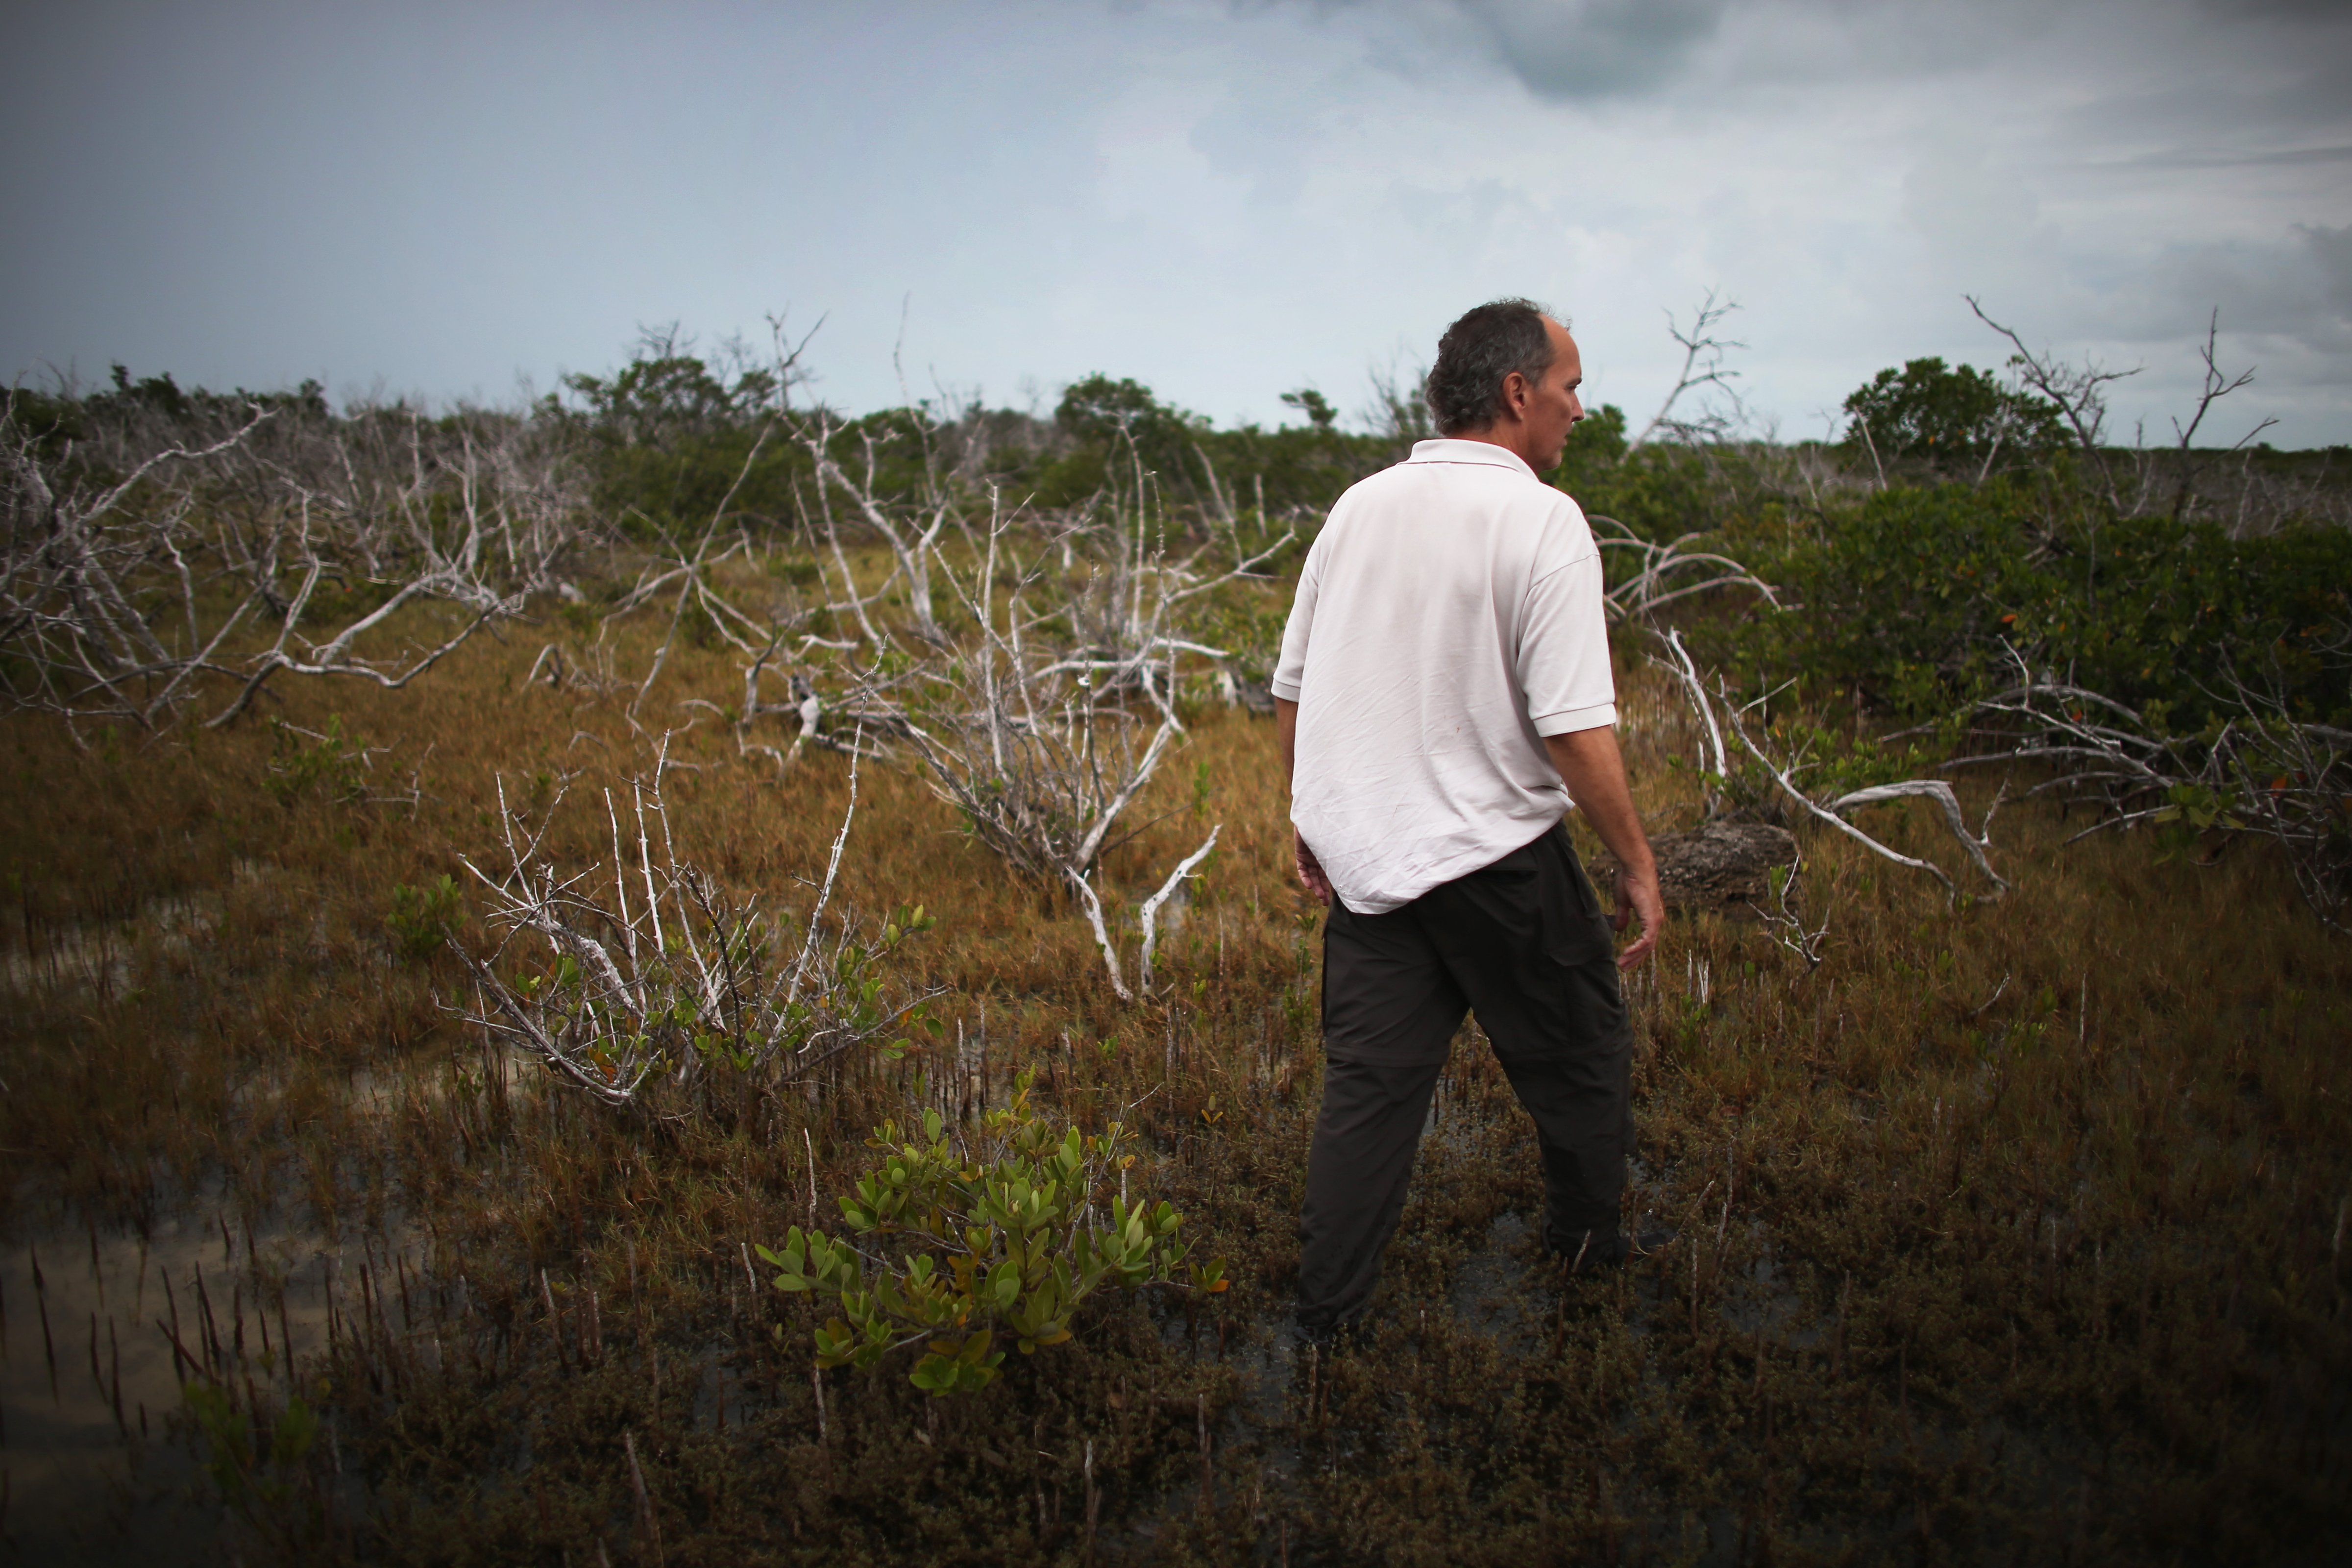 Phillip Hughes, an ecologist with the U.S. Fish and Wildlife Service, walks through an area of buttonwood trees killed by a saltwater incursion in Big Pine Key, Florida. Hughes says over the past 50 years, as sea levels rise, the Florida Keys upland vegetation has been dying off and replaced by salt-tolerant vegetation (Joe Raedle—Getty Images)